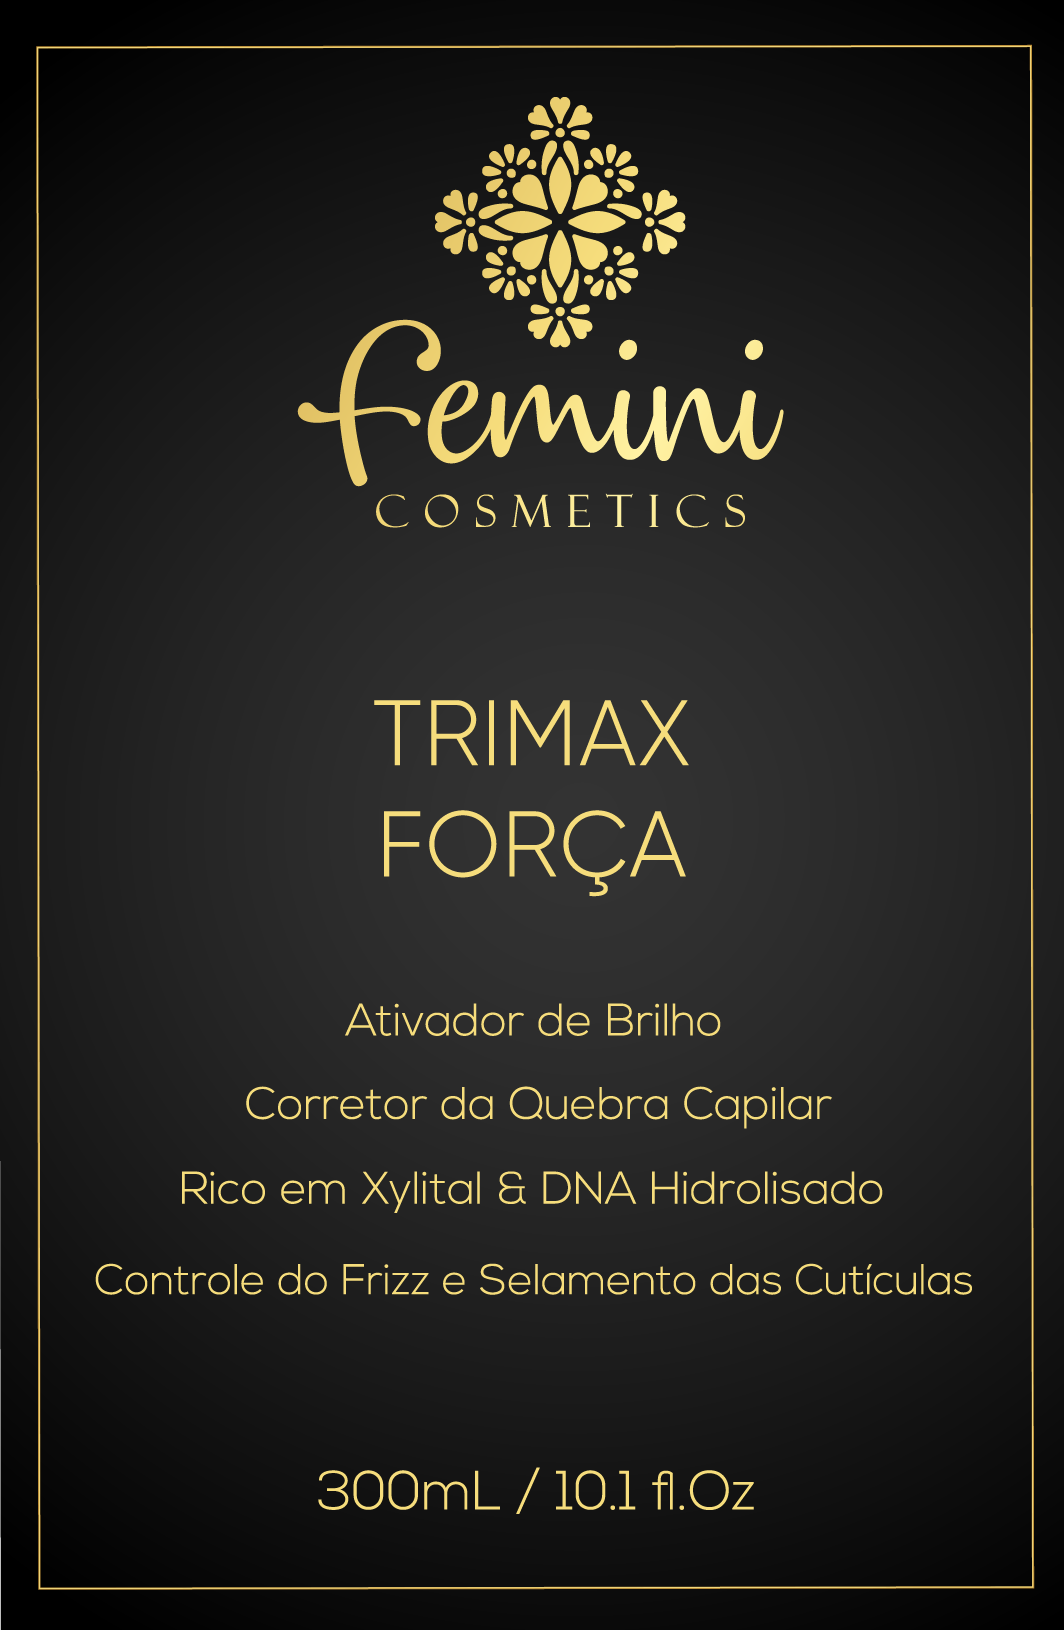 TRIMAX-FORCA